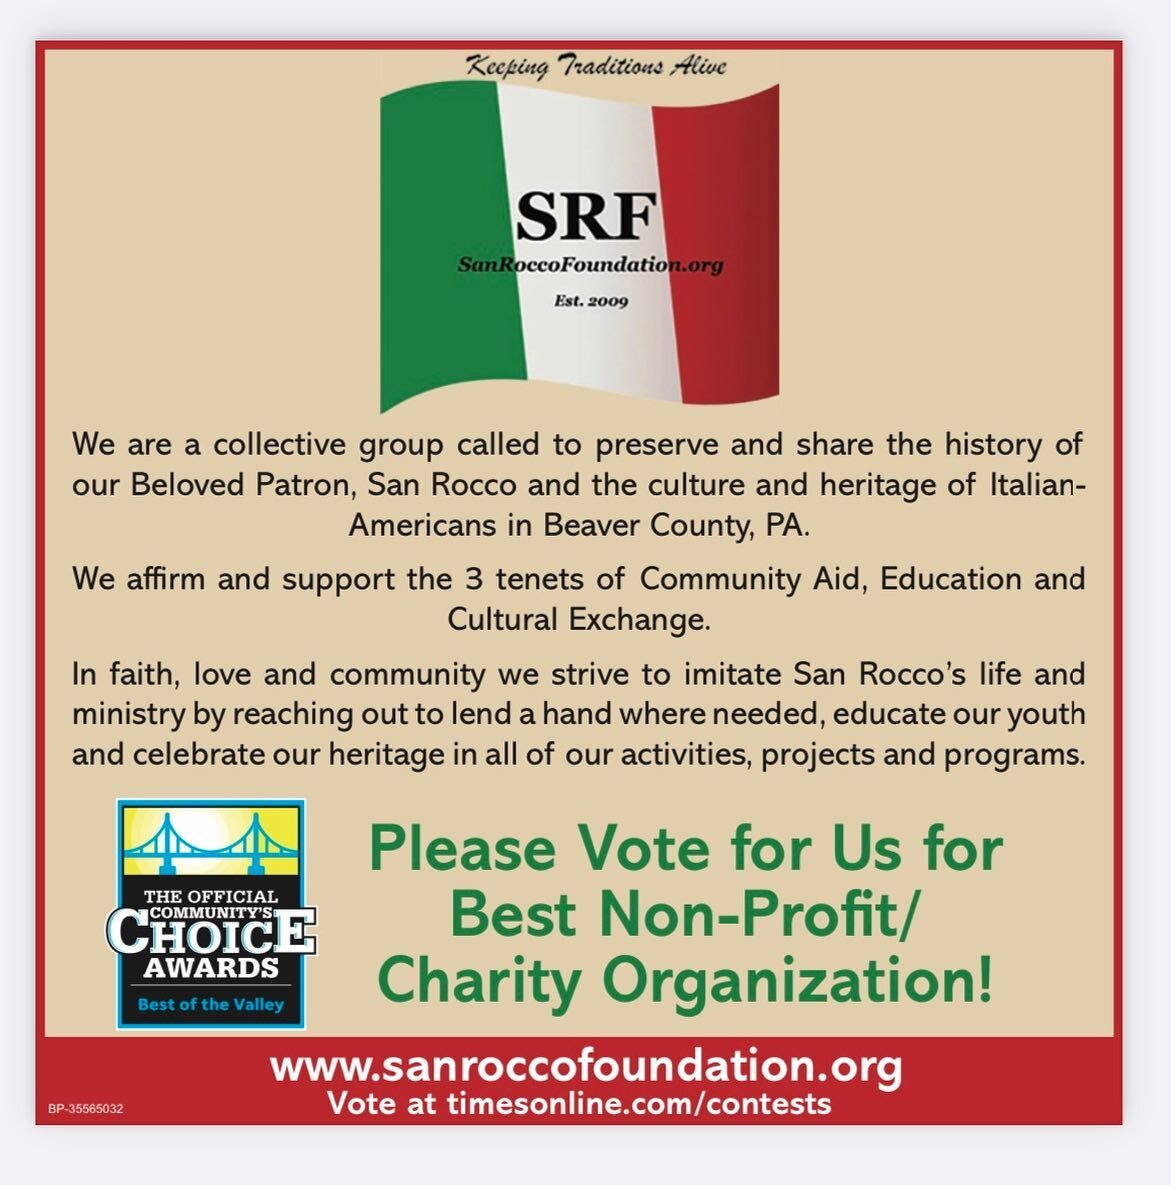 Go to our Facebook or webpage page for all the info!! Vote vote vote #followthefoundation  Www.sanRoccoFoundation.org